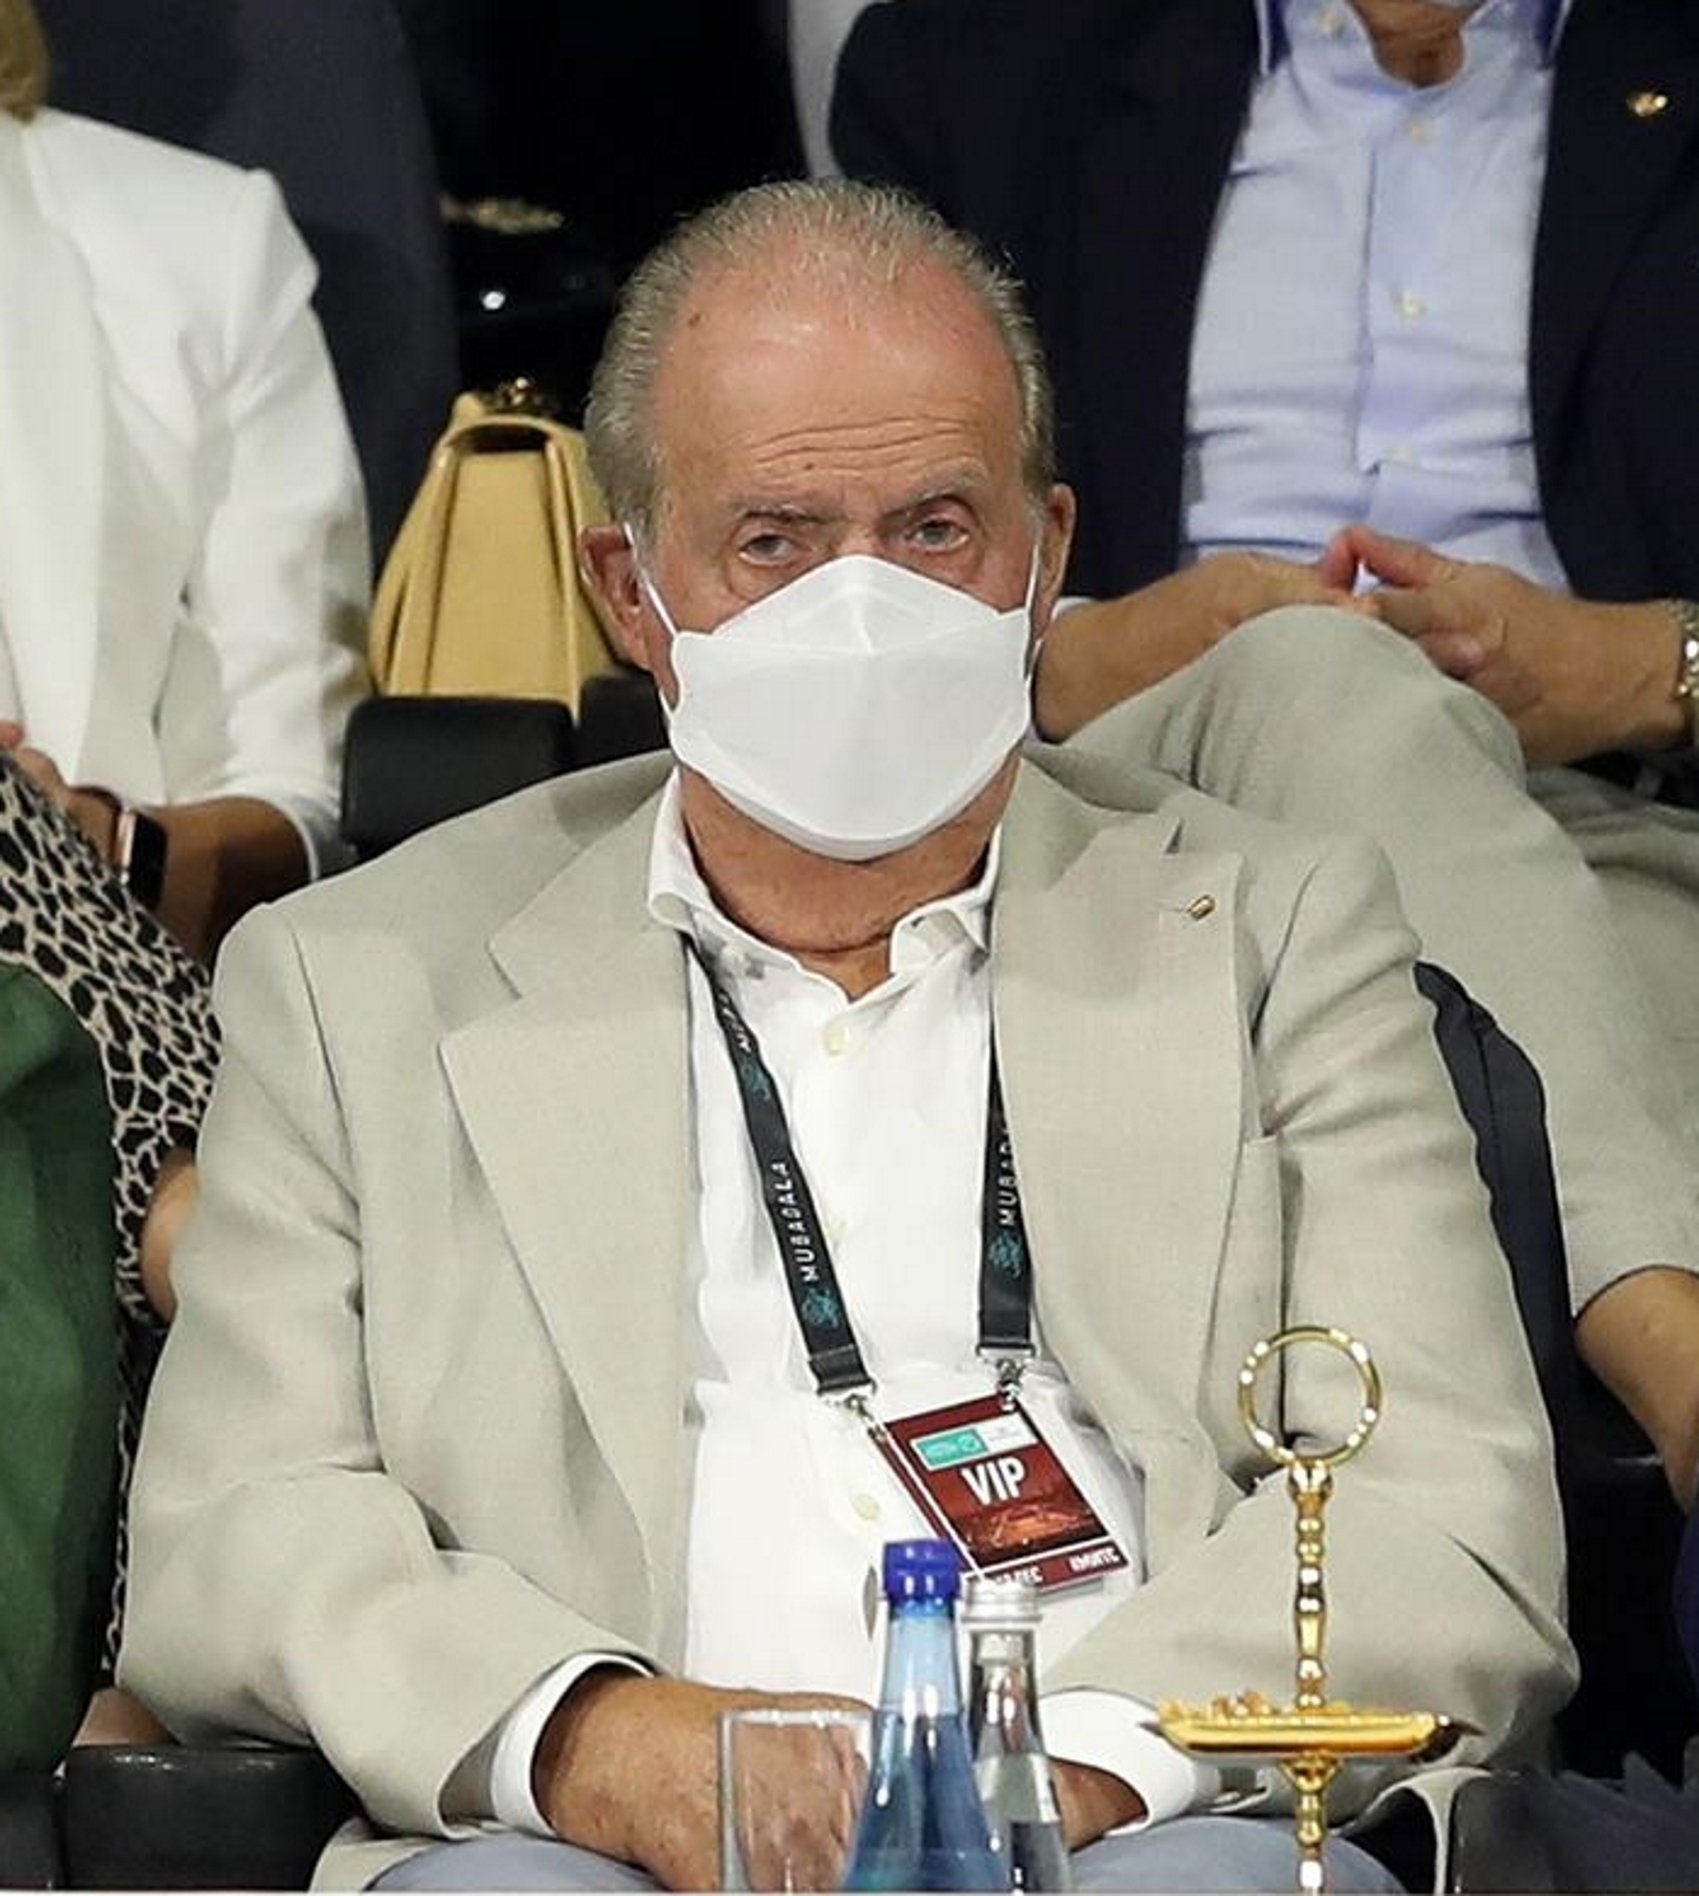 Juan Carlos I is to remain living in Abu Dhabi but will visit Spain "frequently"